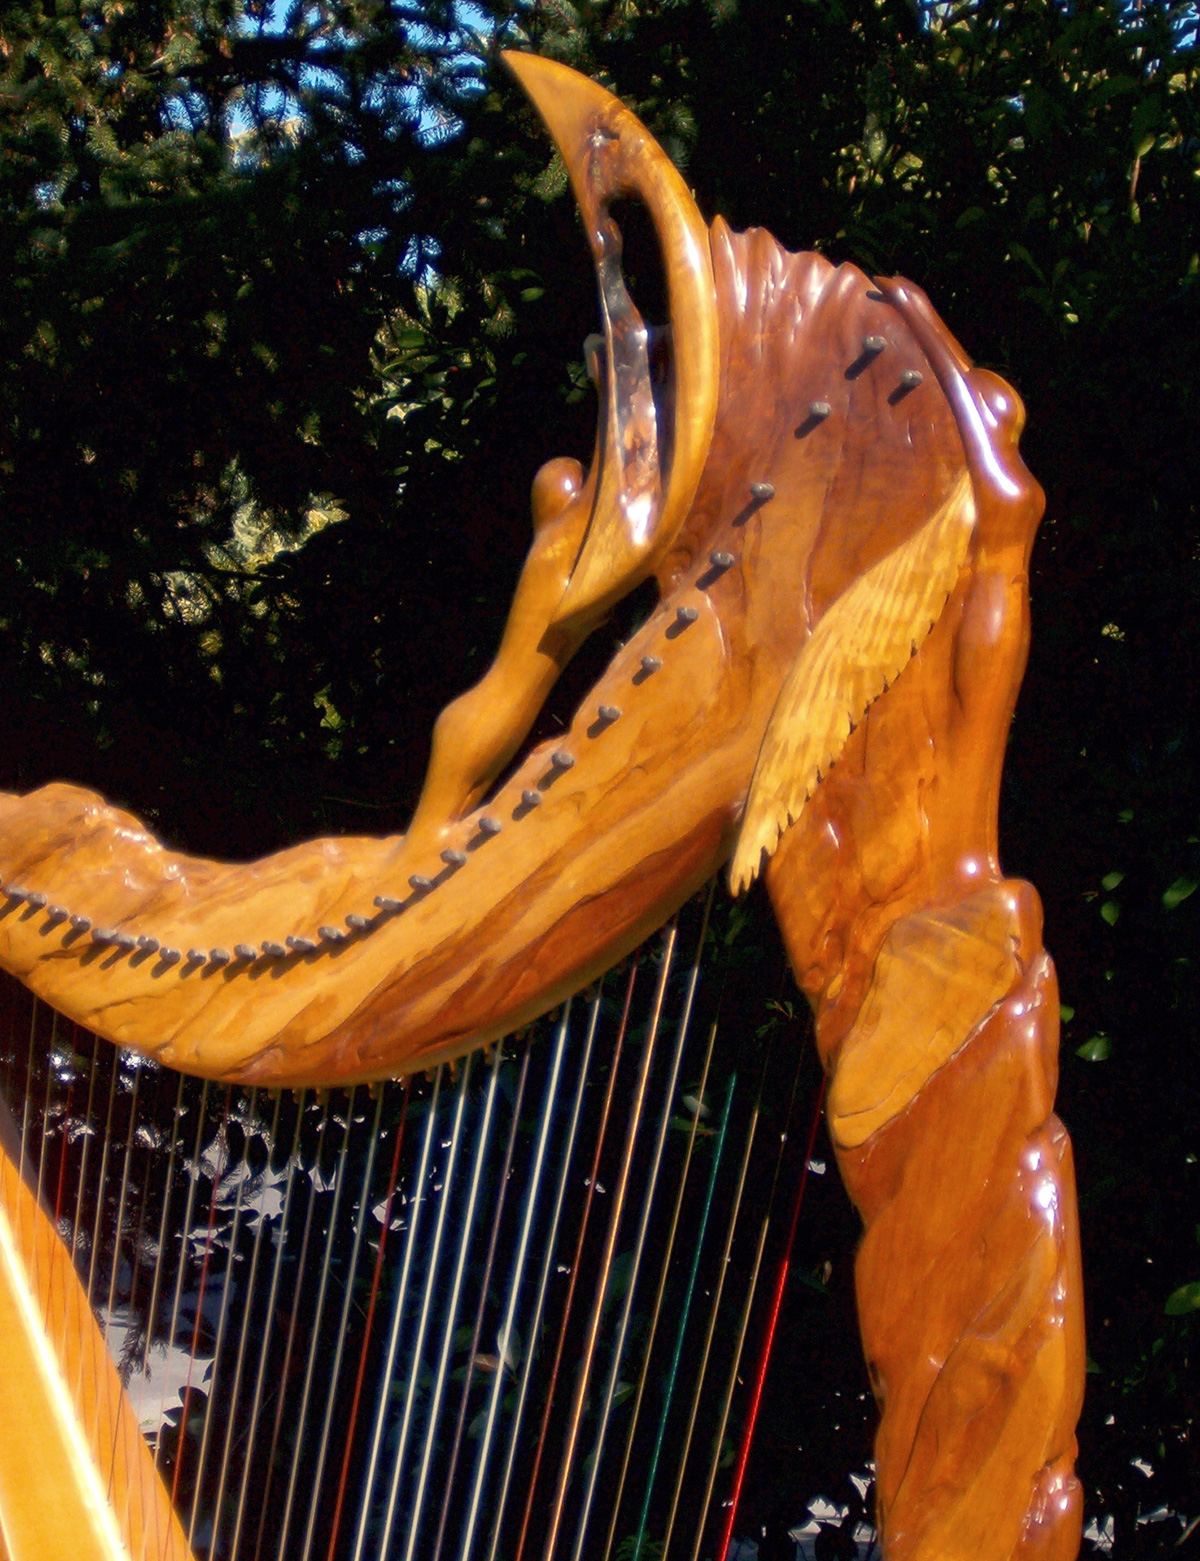 Mountain Glen Harps uses sustainably grown and harvested woods in all our custom harps